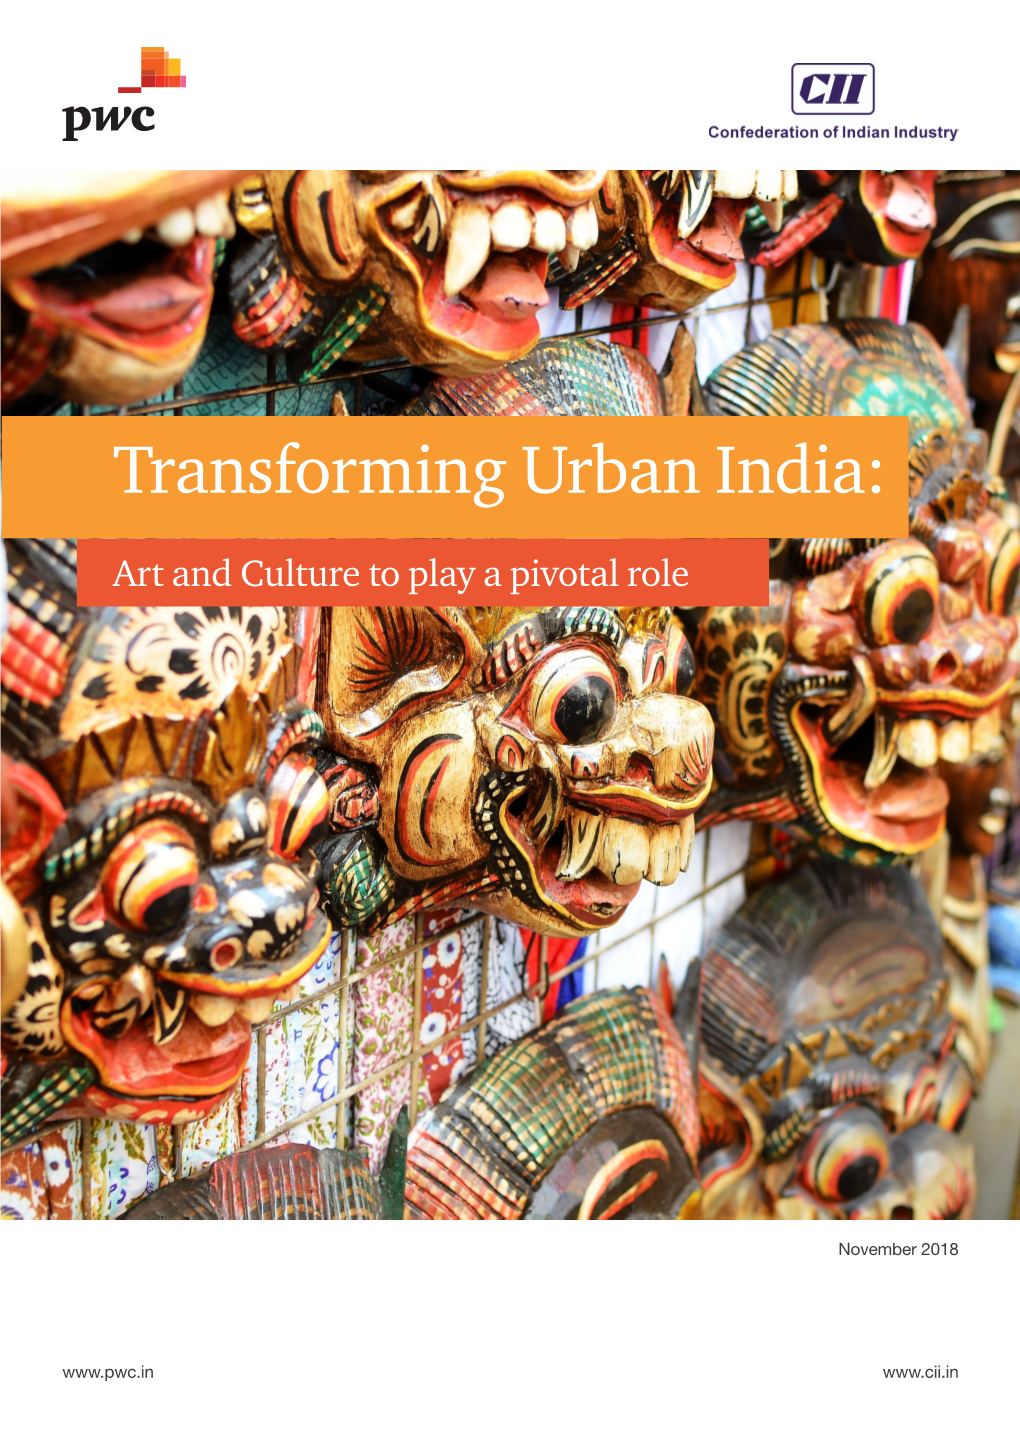 Transforming Urban India: Art and Culture to Play a Pivotal Role | 3 4 | Pwc - CII Contents